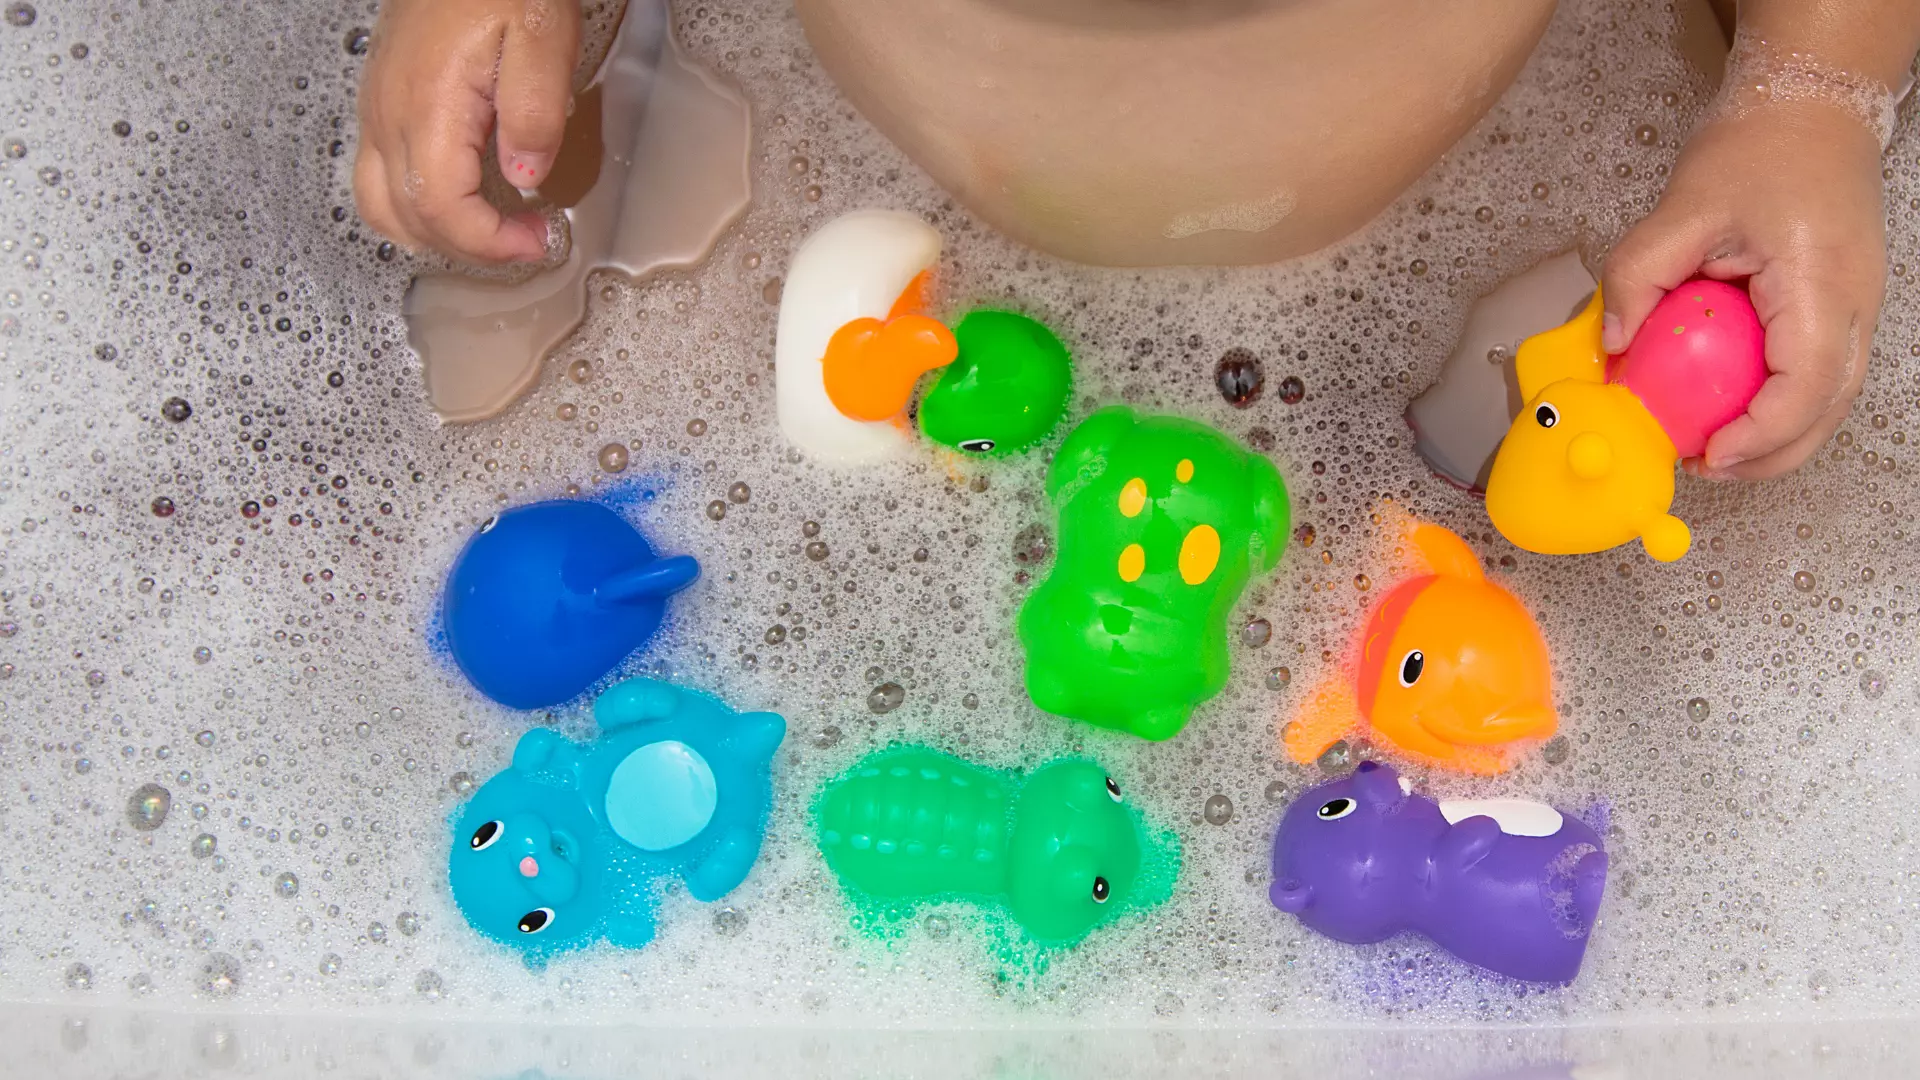 How to clean and disinfect moldy bath toys